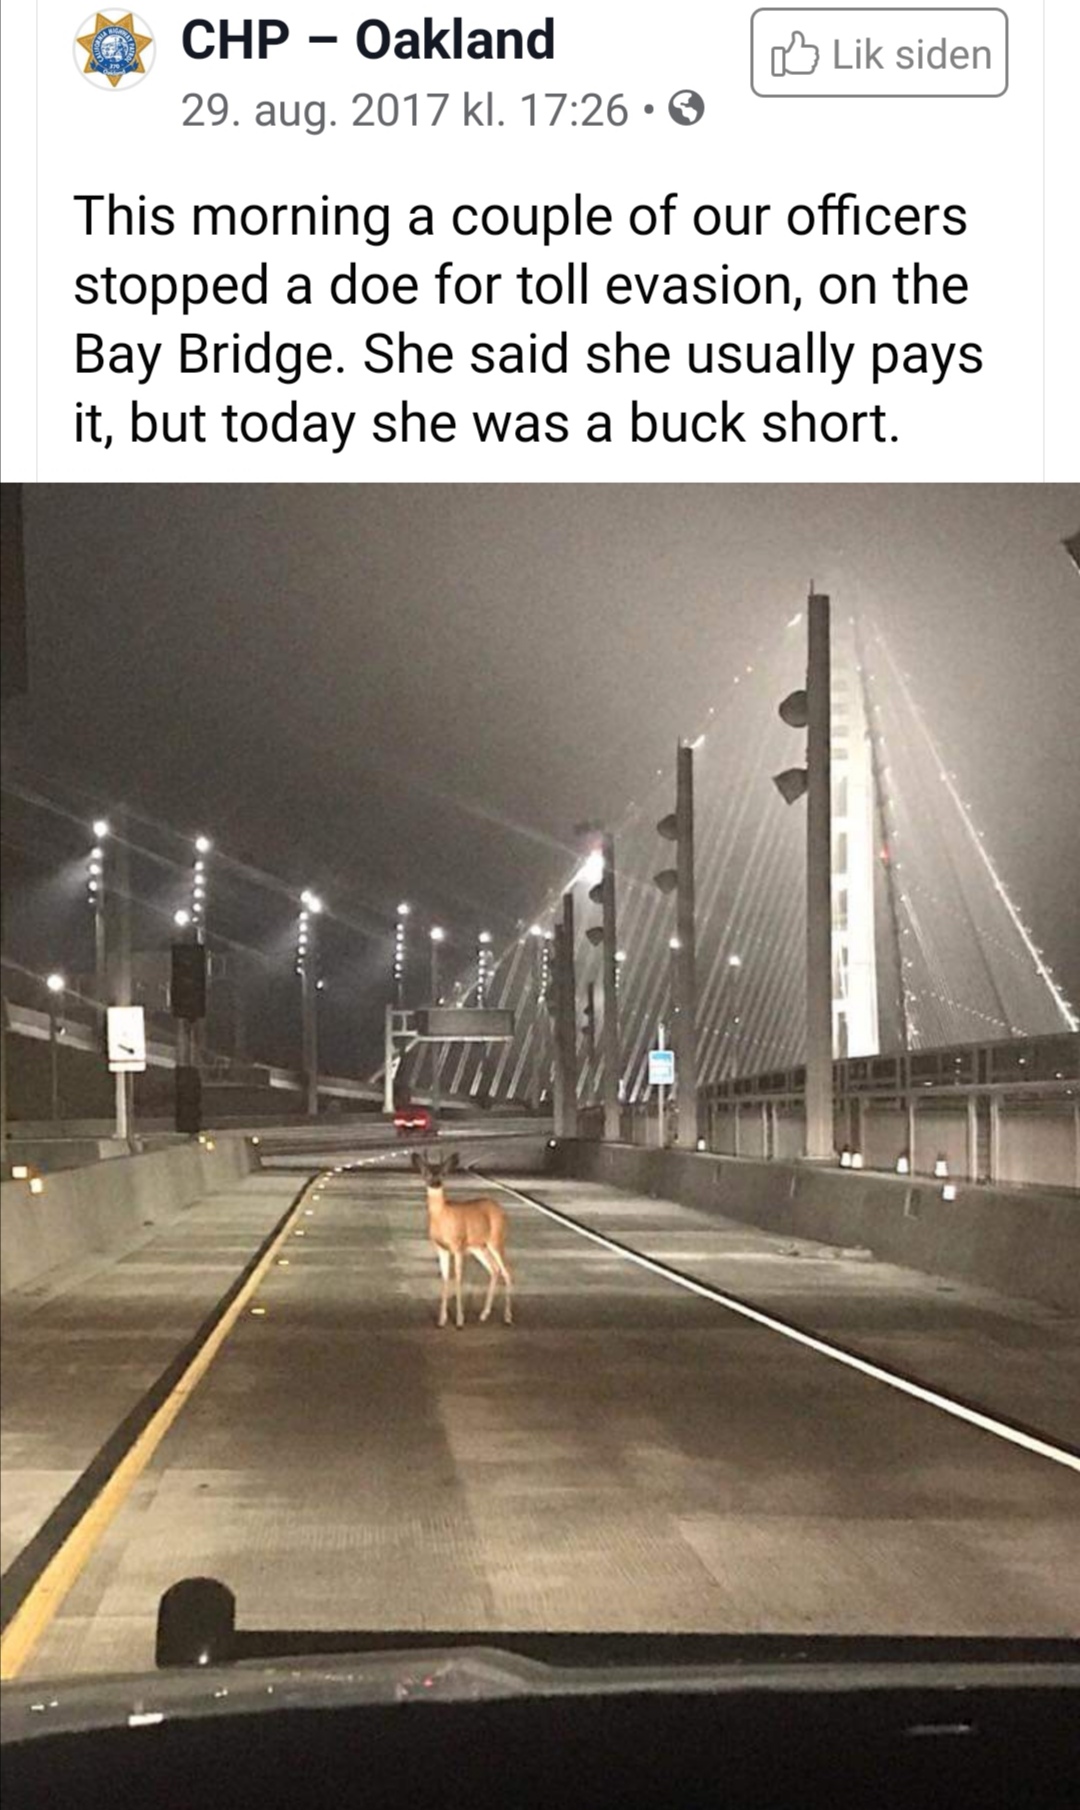 deer on the bay bridge - Chp Oakland 29. aug. 2017 kl. . Lik siden This morning a couple of our officers stopped a doe for toll evasion, on the Bay Bridge. She said she usually pays it, but today she was a buck short.